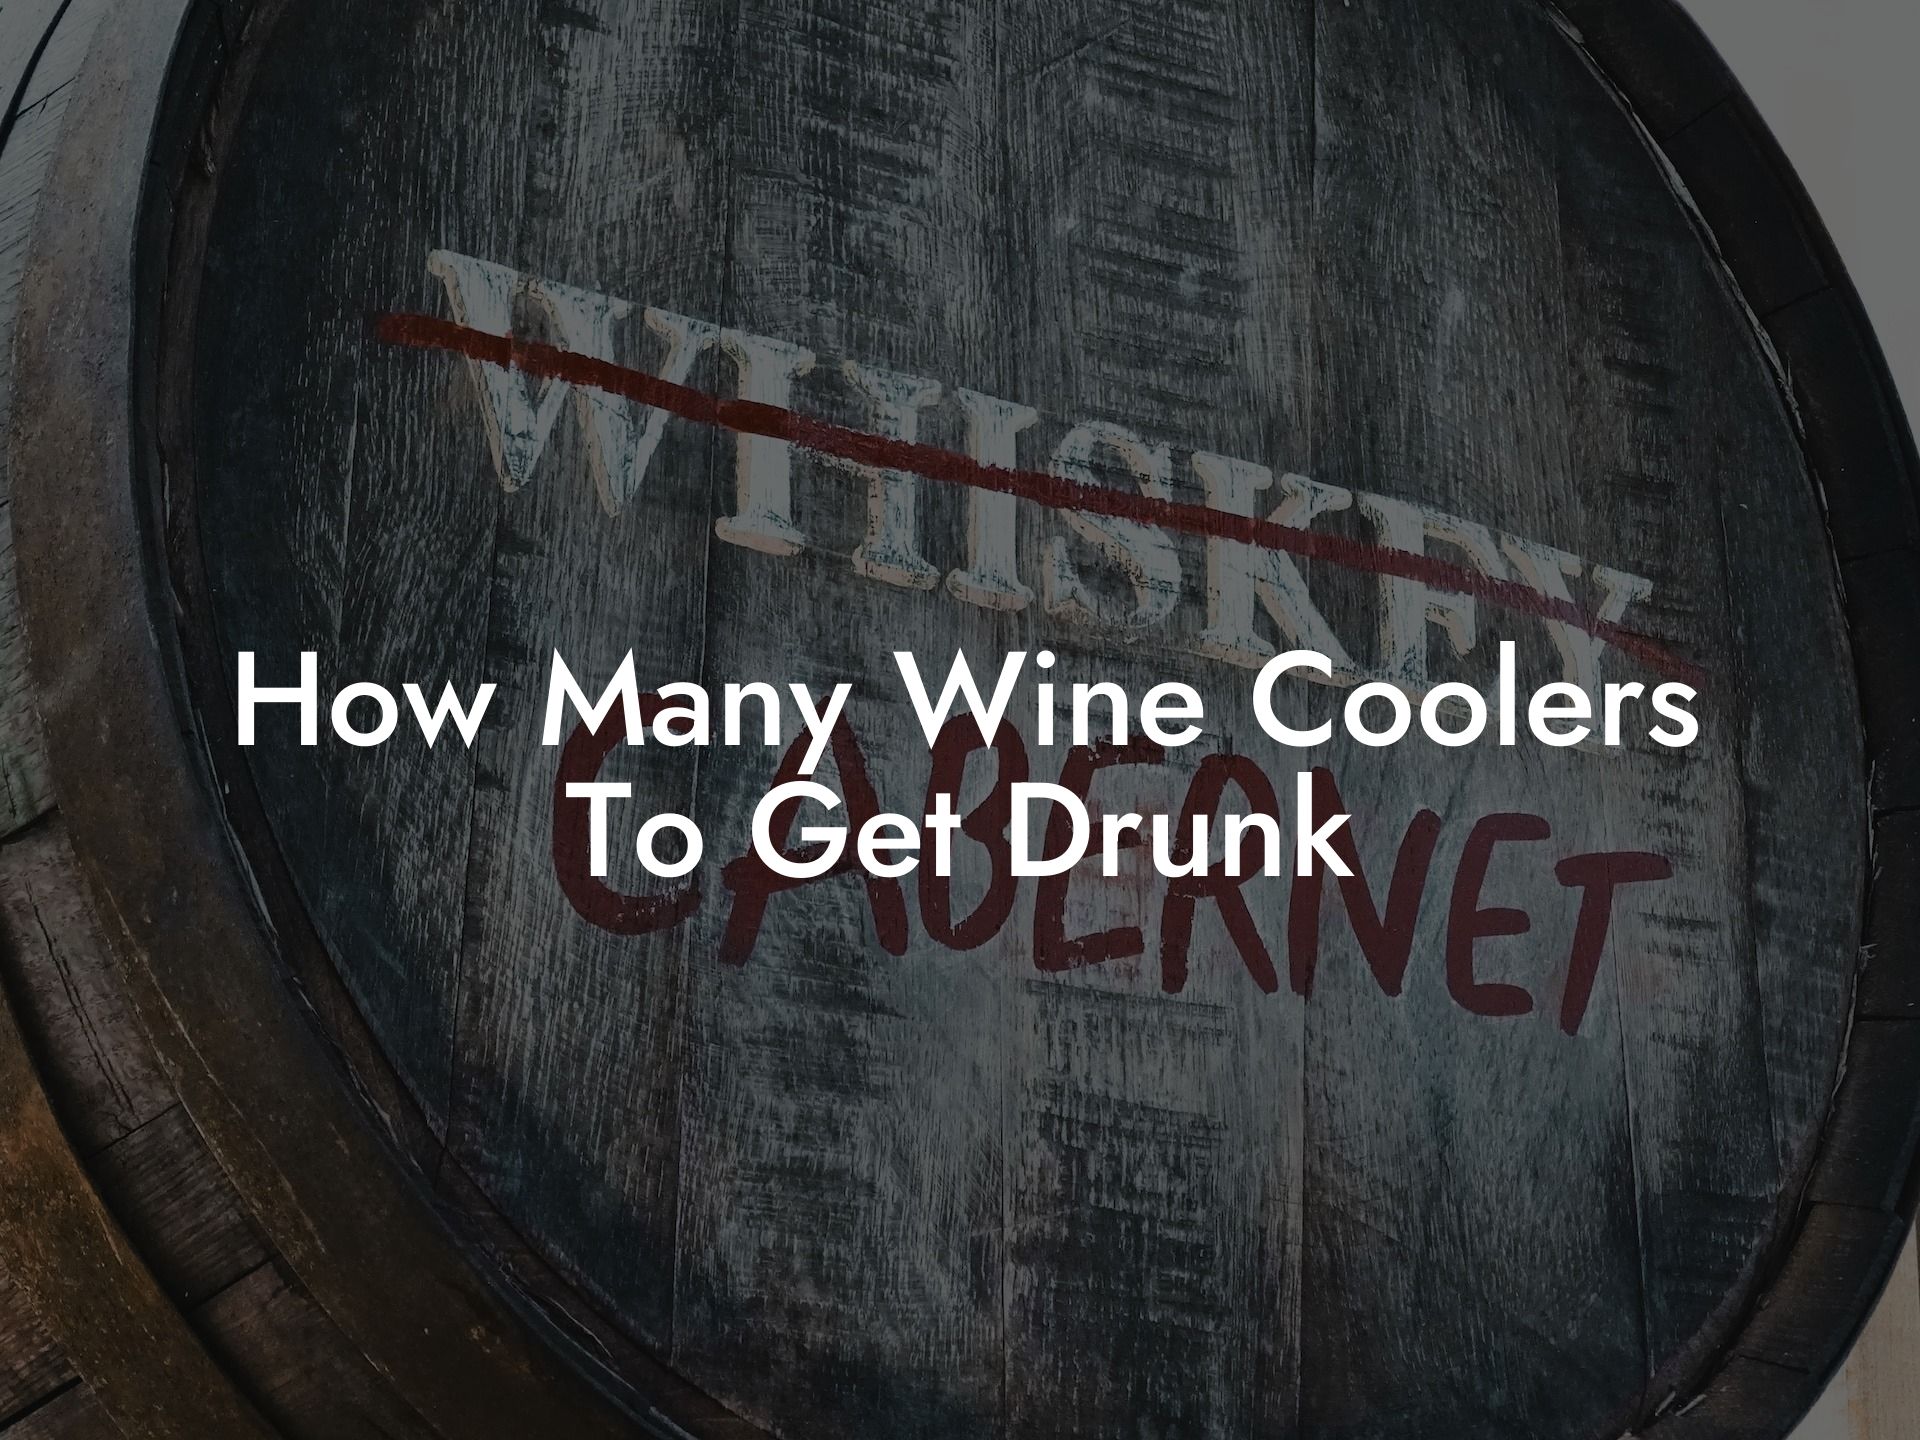 How Many Wine Coolers To Get Drunk